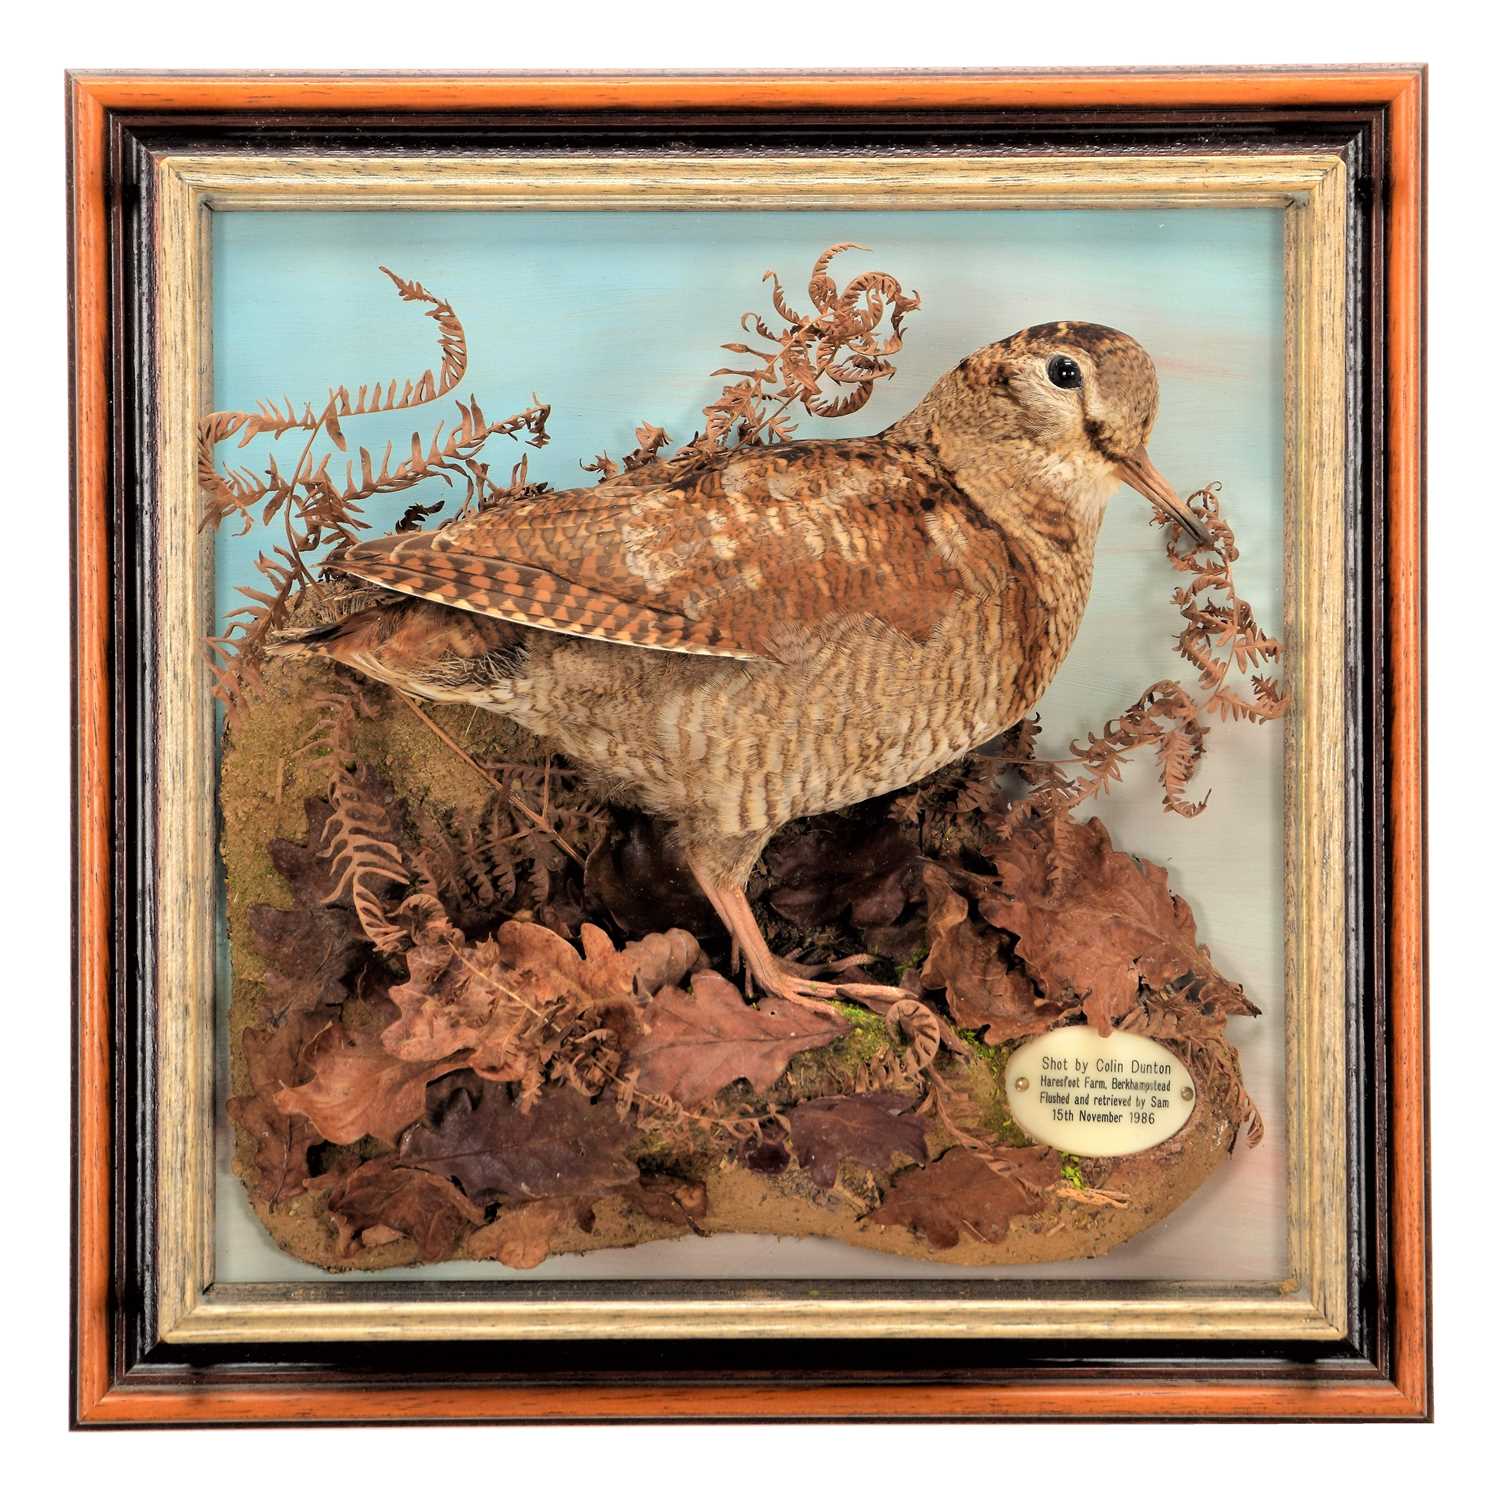 Taxidermy: A Rare & Unusual Short Beaked European Woodcock (Scolopax), dated 1986, by Colin